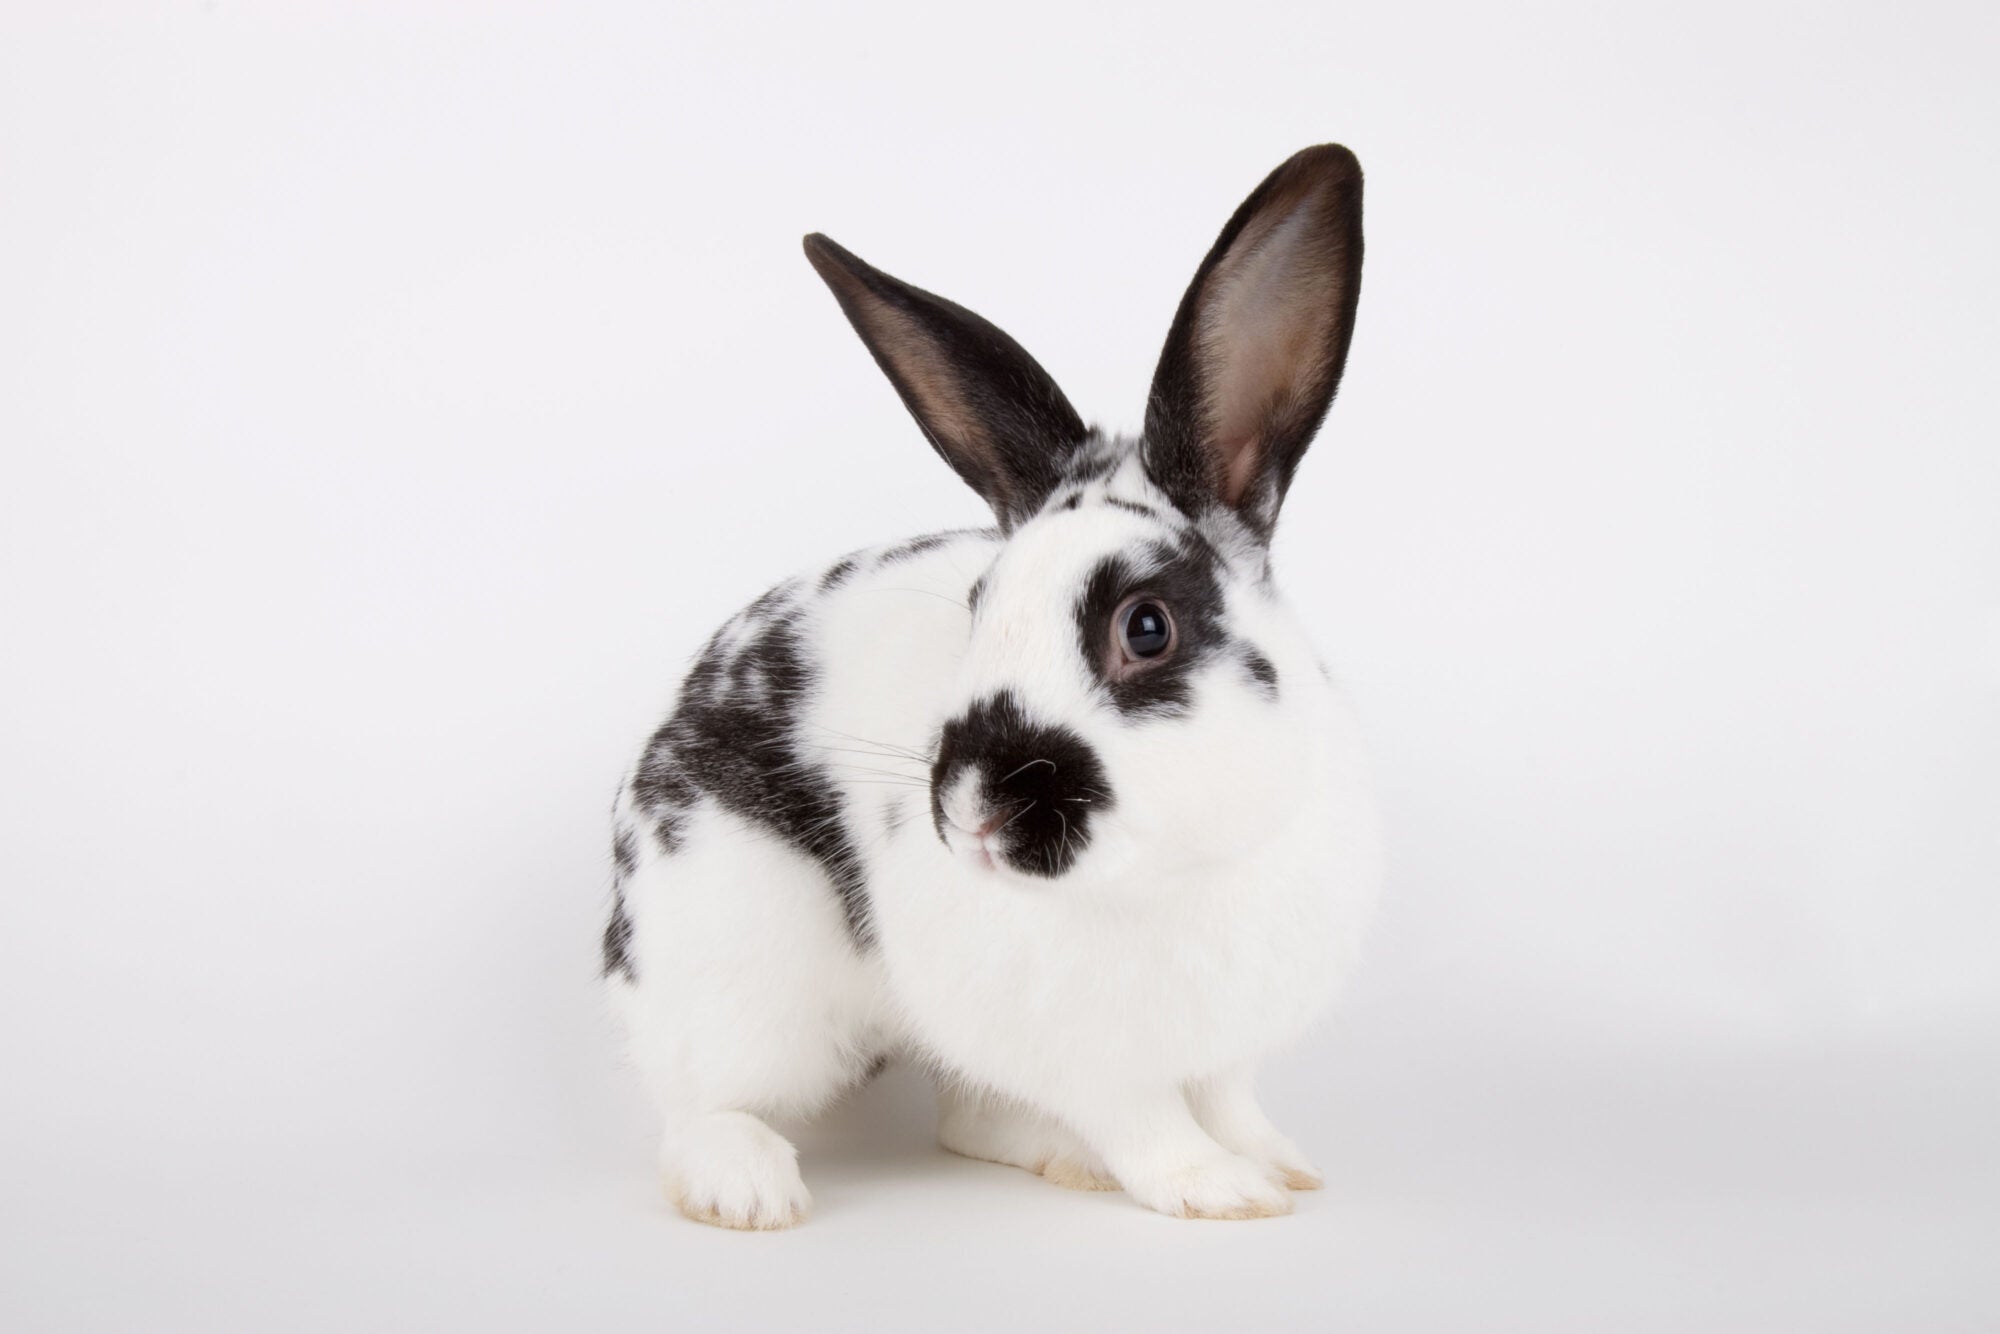 Victory! Cosmetics animal testing and trade will be banned in Canada -  Humane Society International